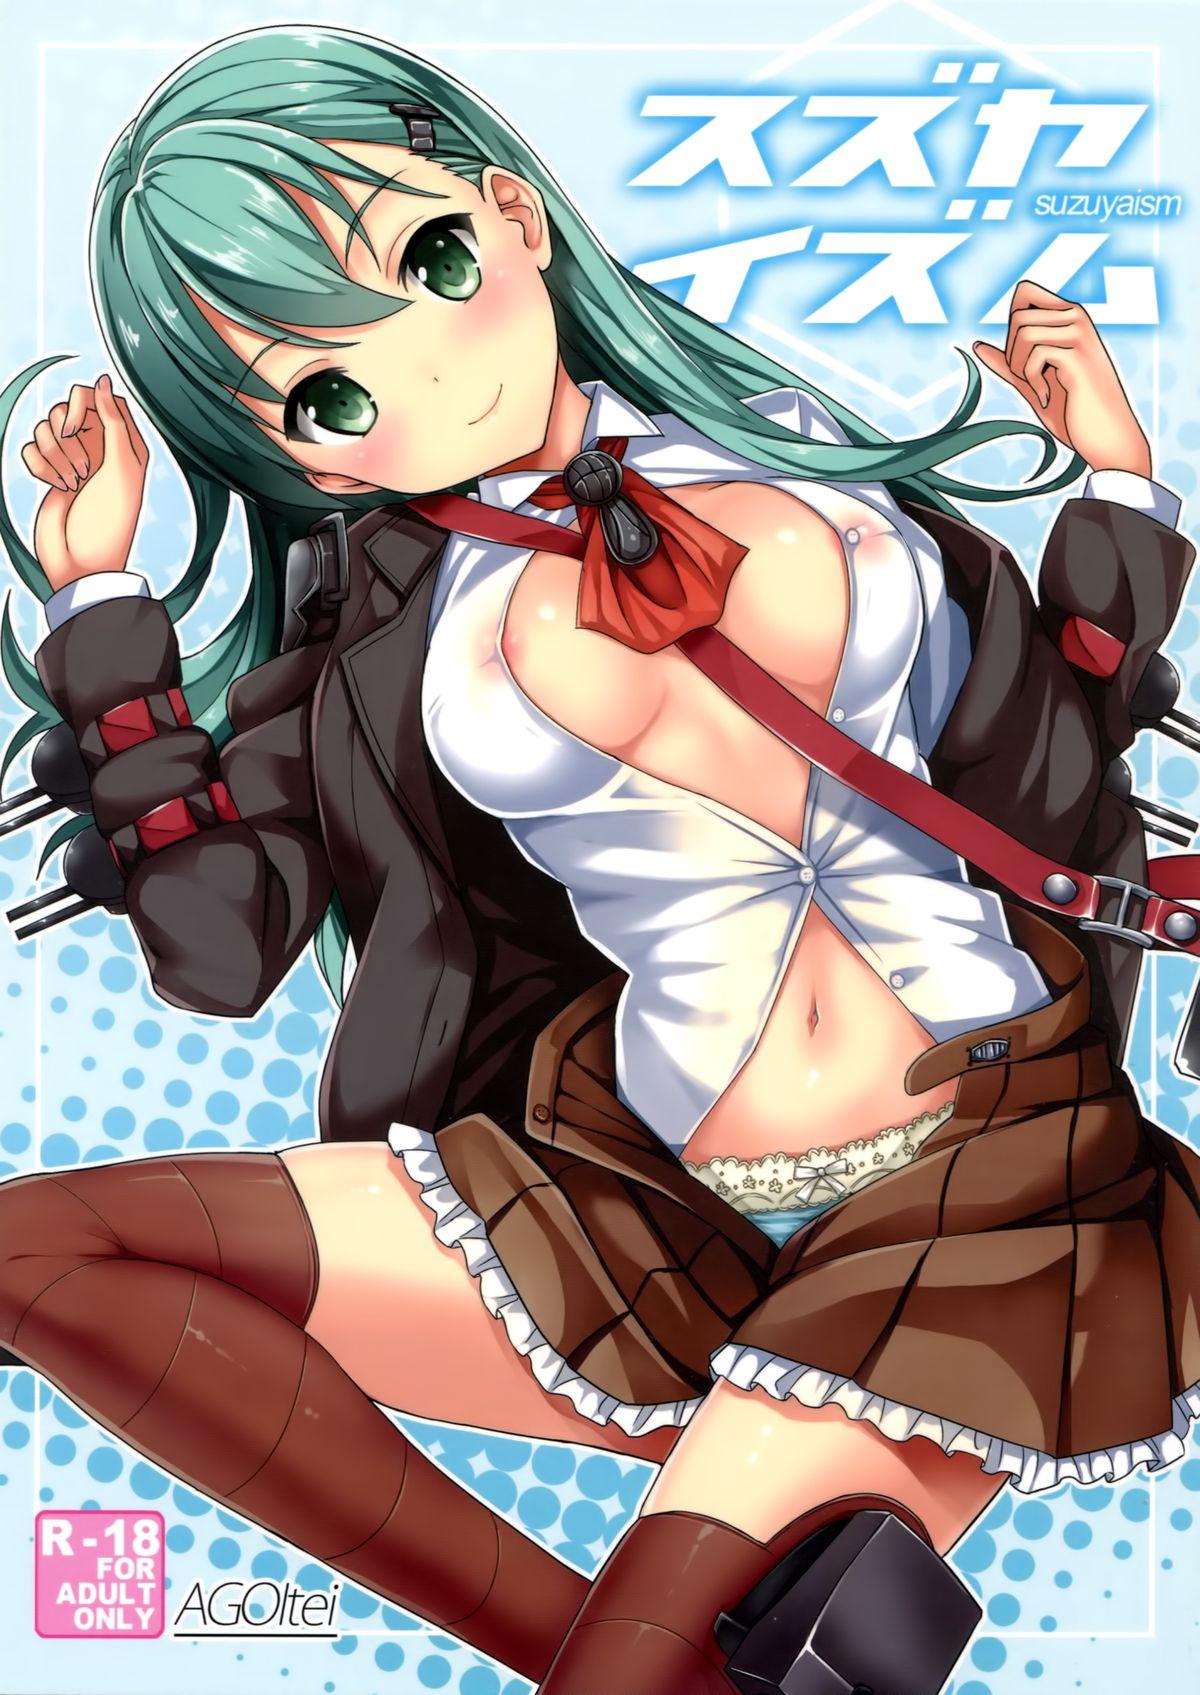 Bisexual Suzuyaism - Kantai collection Step Fantasy - Picture 1